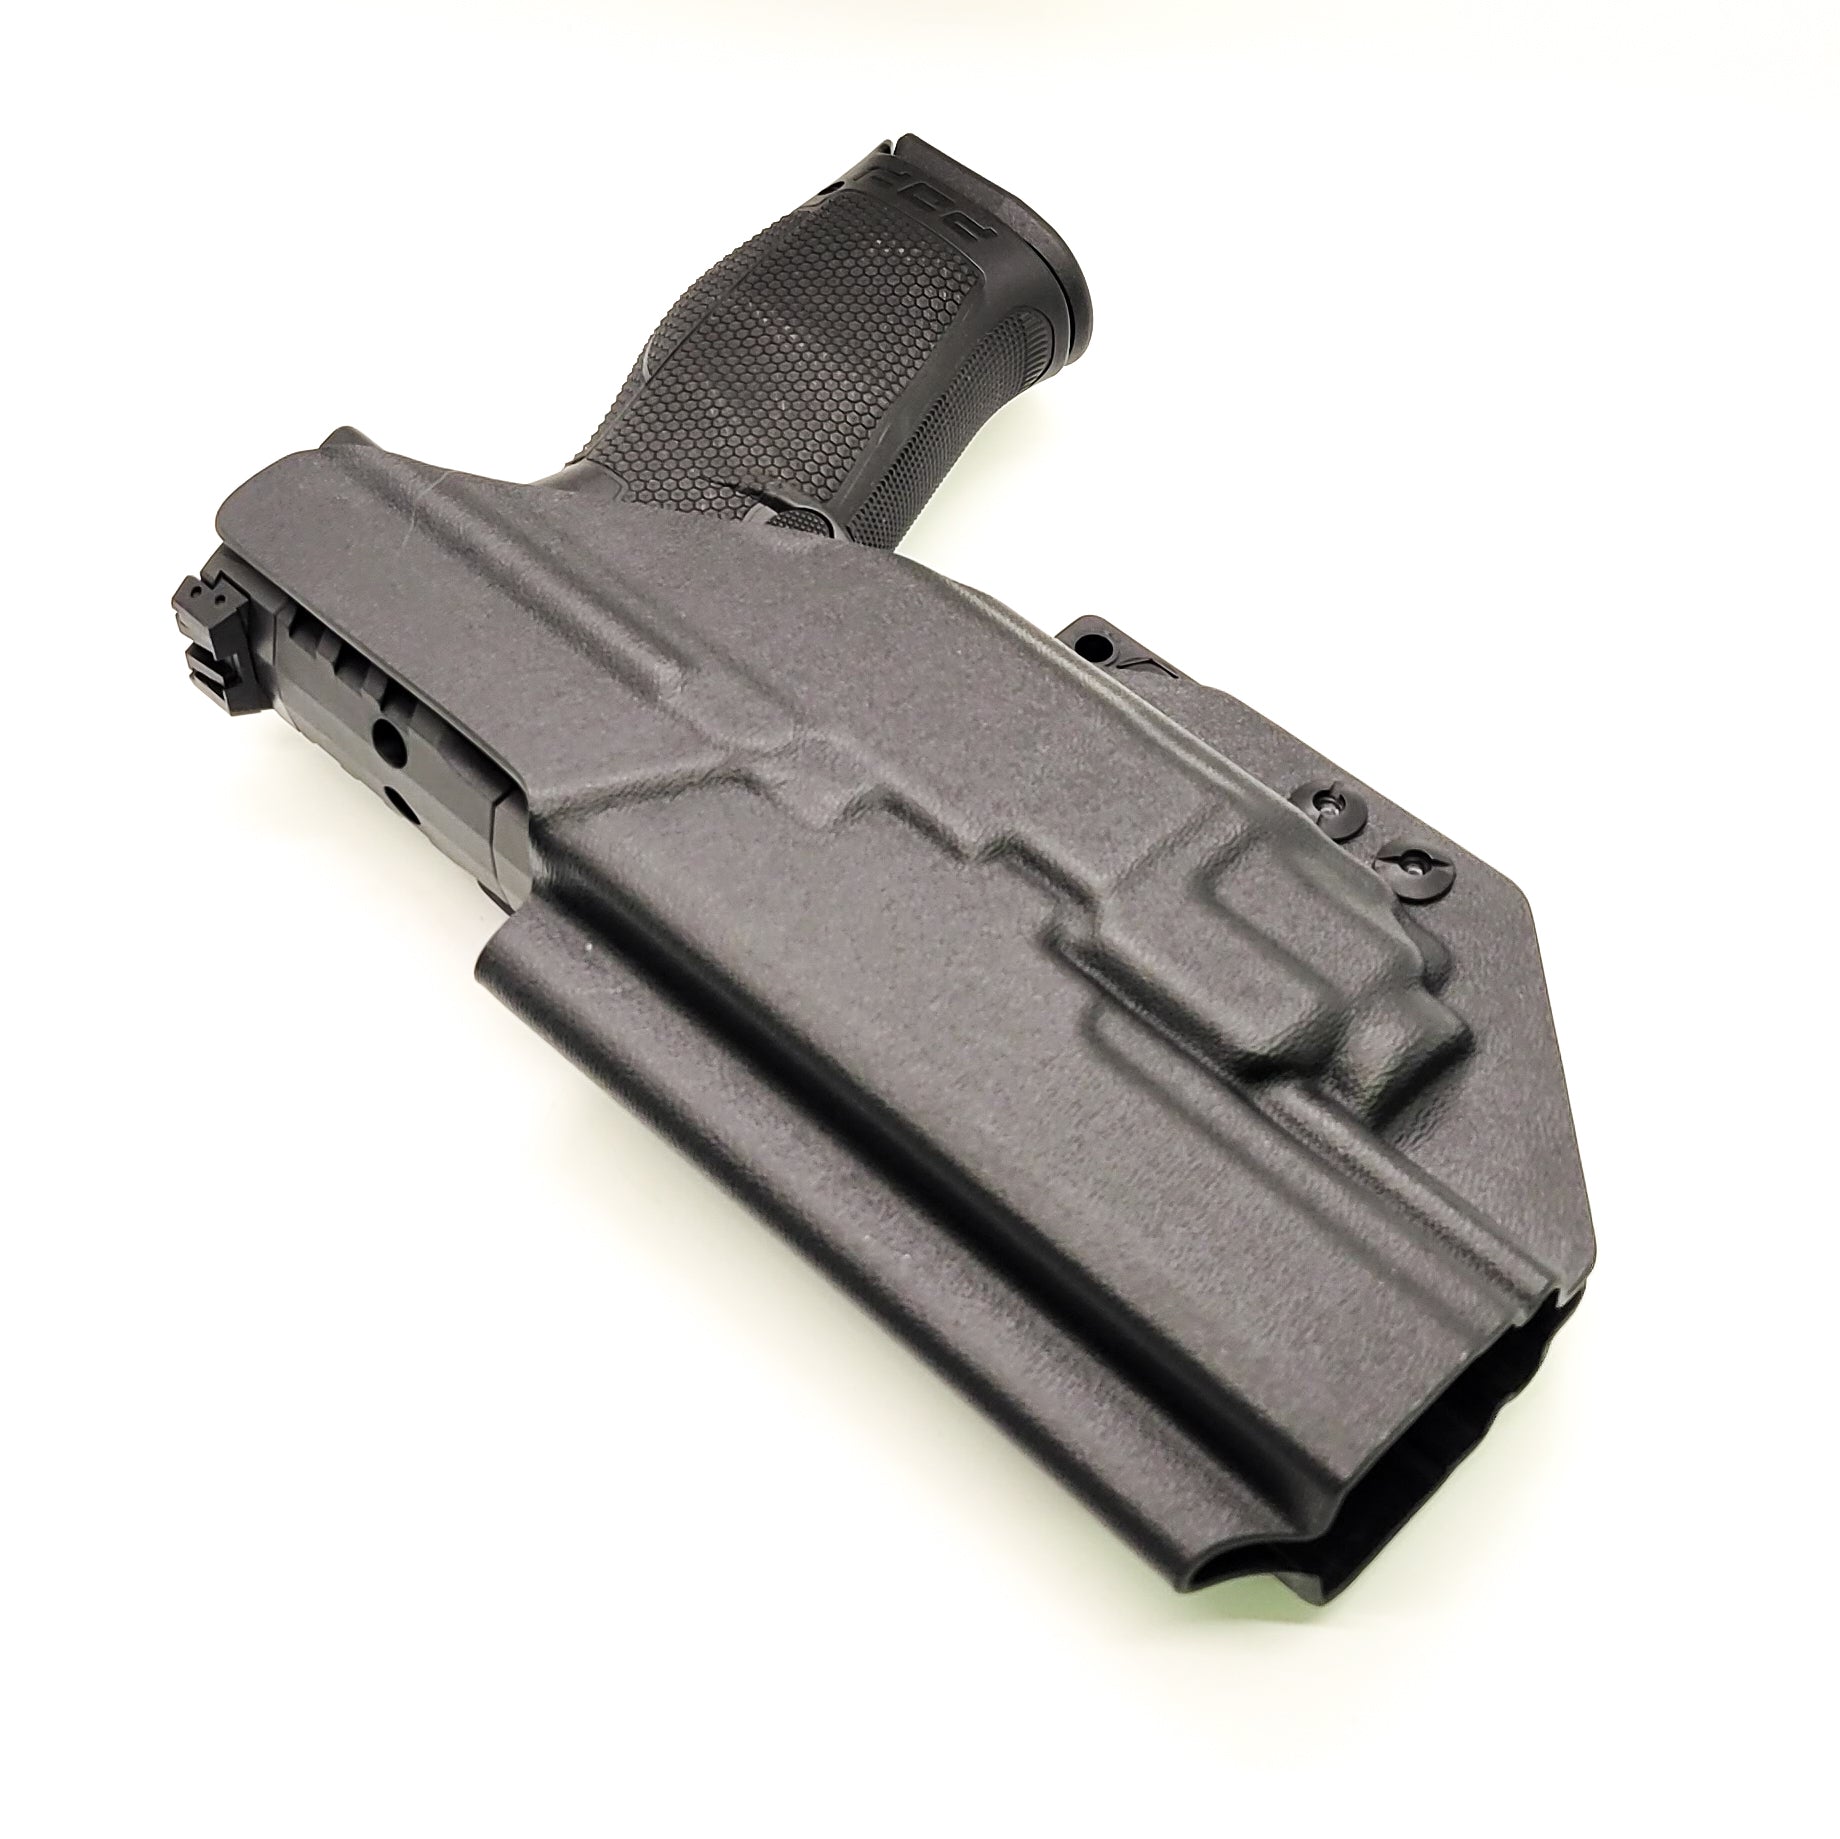 For the best concealed carry Inside Waistband IWB AIWB Holster designed to fit the Walther PDP Compact 5" pistol with Streamlight TLR-8 on the firearm, shop Four Brothers Holsters. Cut for red dot sight, full sweat guard, adjustable retention & open muzzle for threaded barrels & compensators.